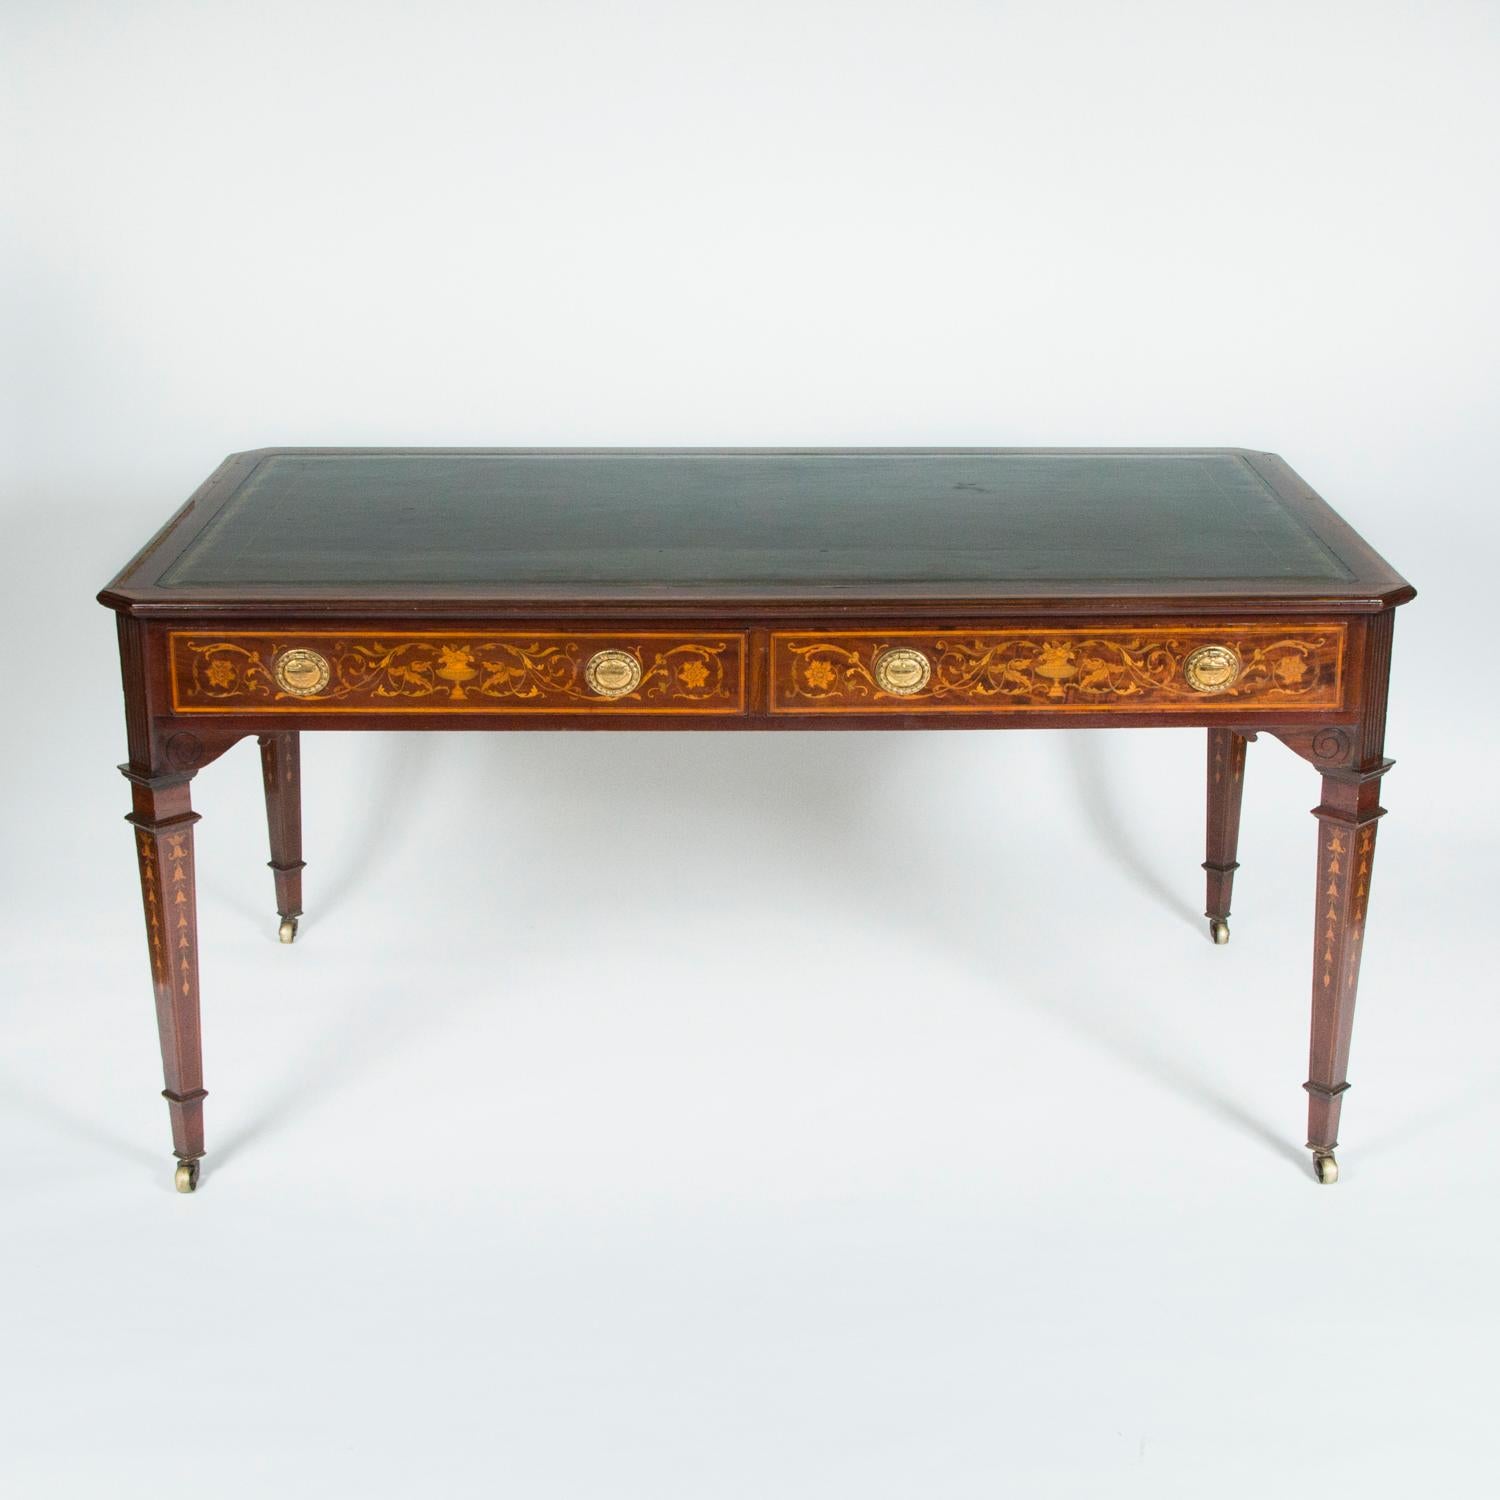 A fine quality freestanding mahogany desk, with detailed floral marquetry and carved decoration the frieze and legs, a green tooled leather top with satinwood banding, and brass castors. 

The frieze conceals two drawers with oval gilt brass